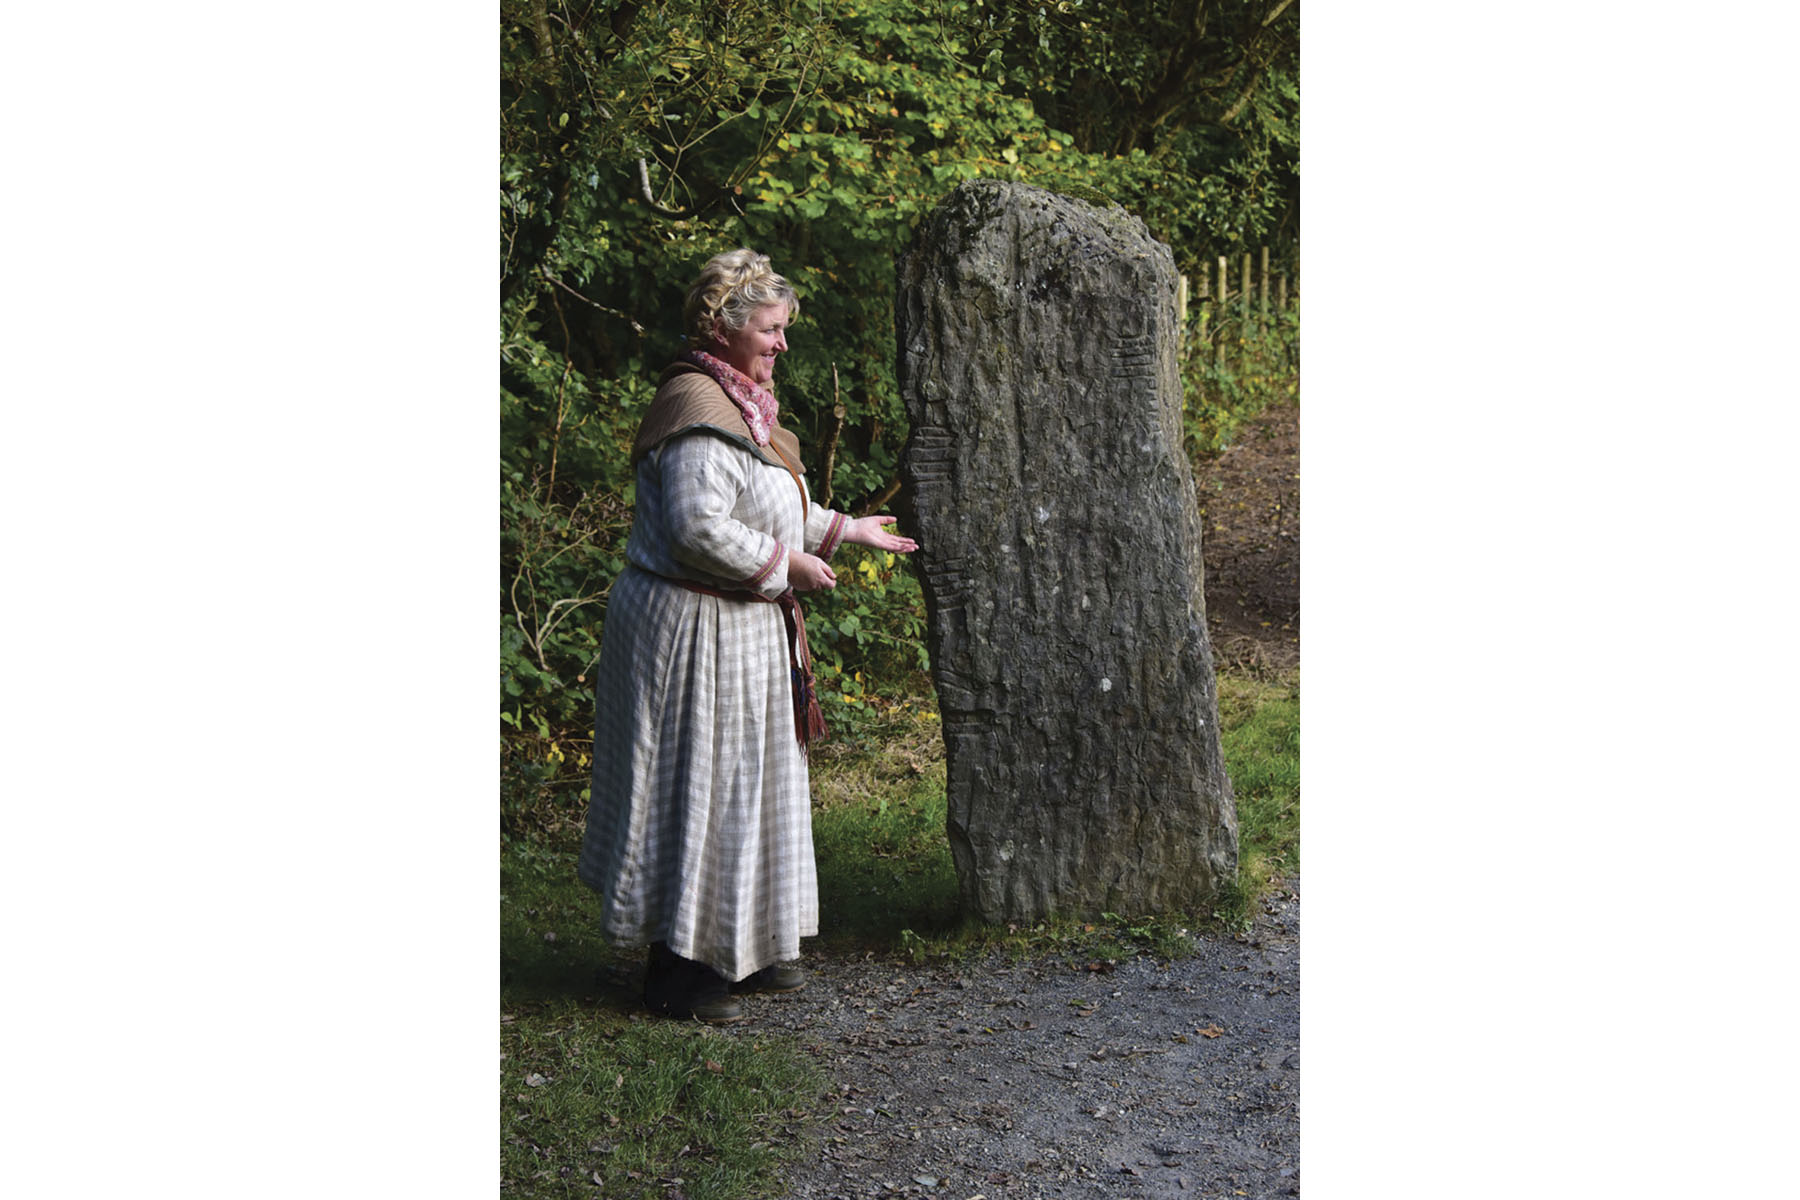 Ogham stones being explained at the national heritage park.